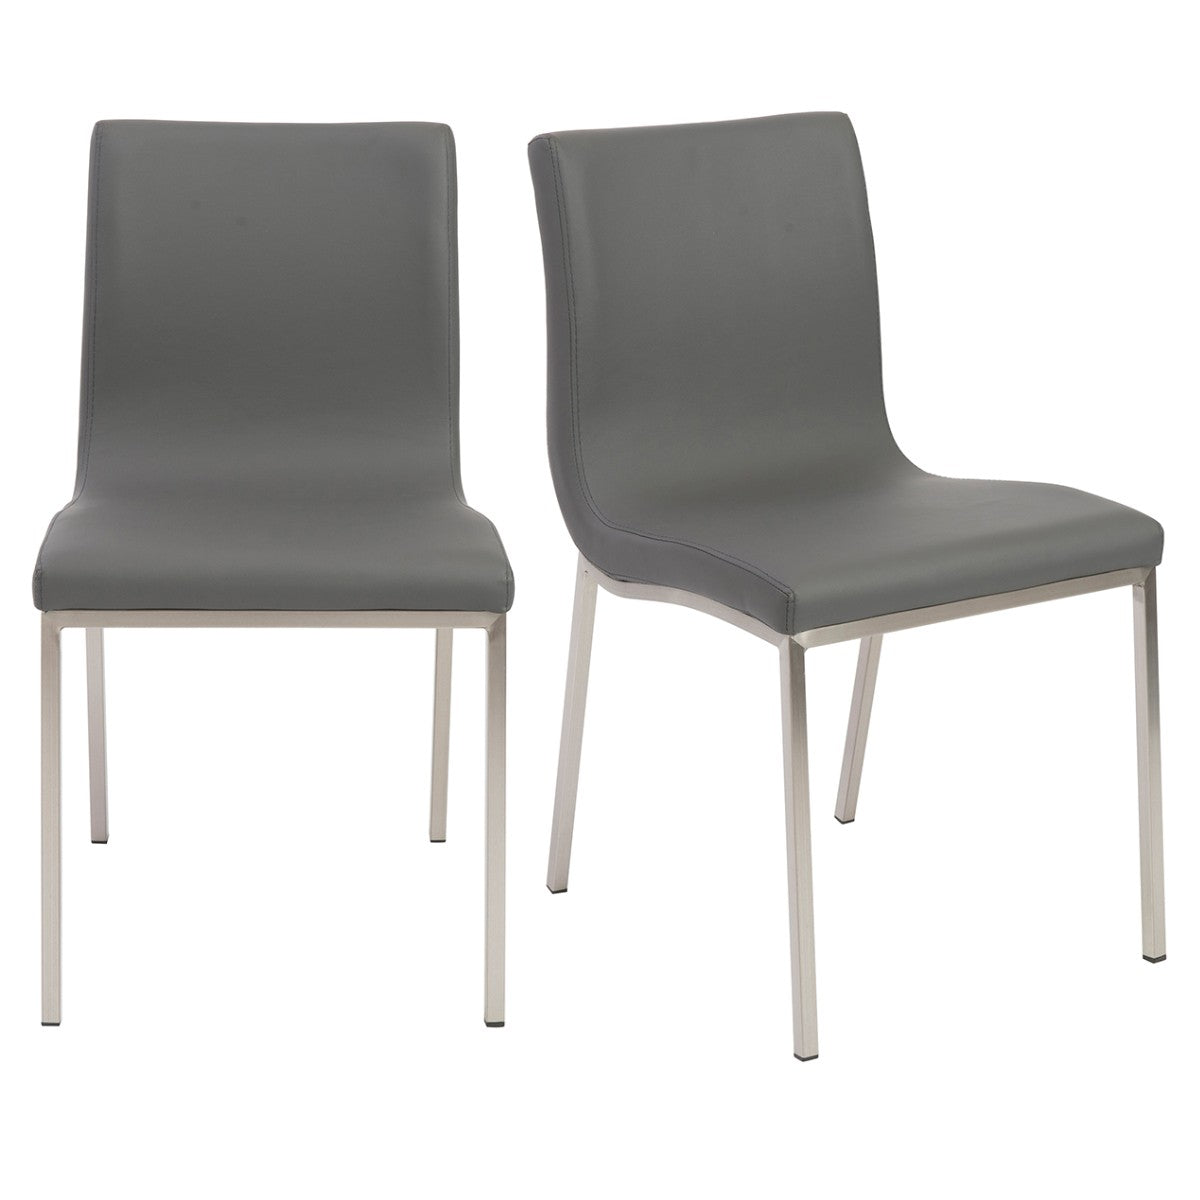 Set of Two Minimalist Light Gray Faux Faux Leather Chairs